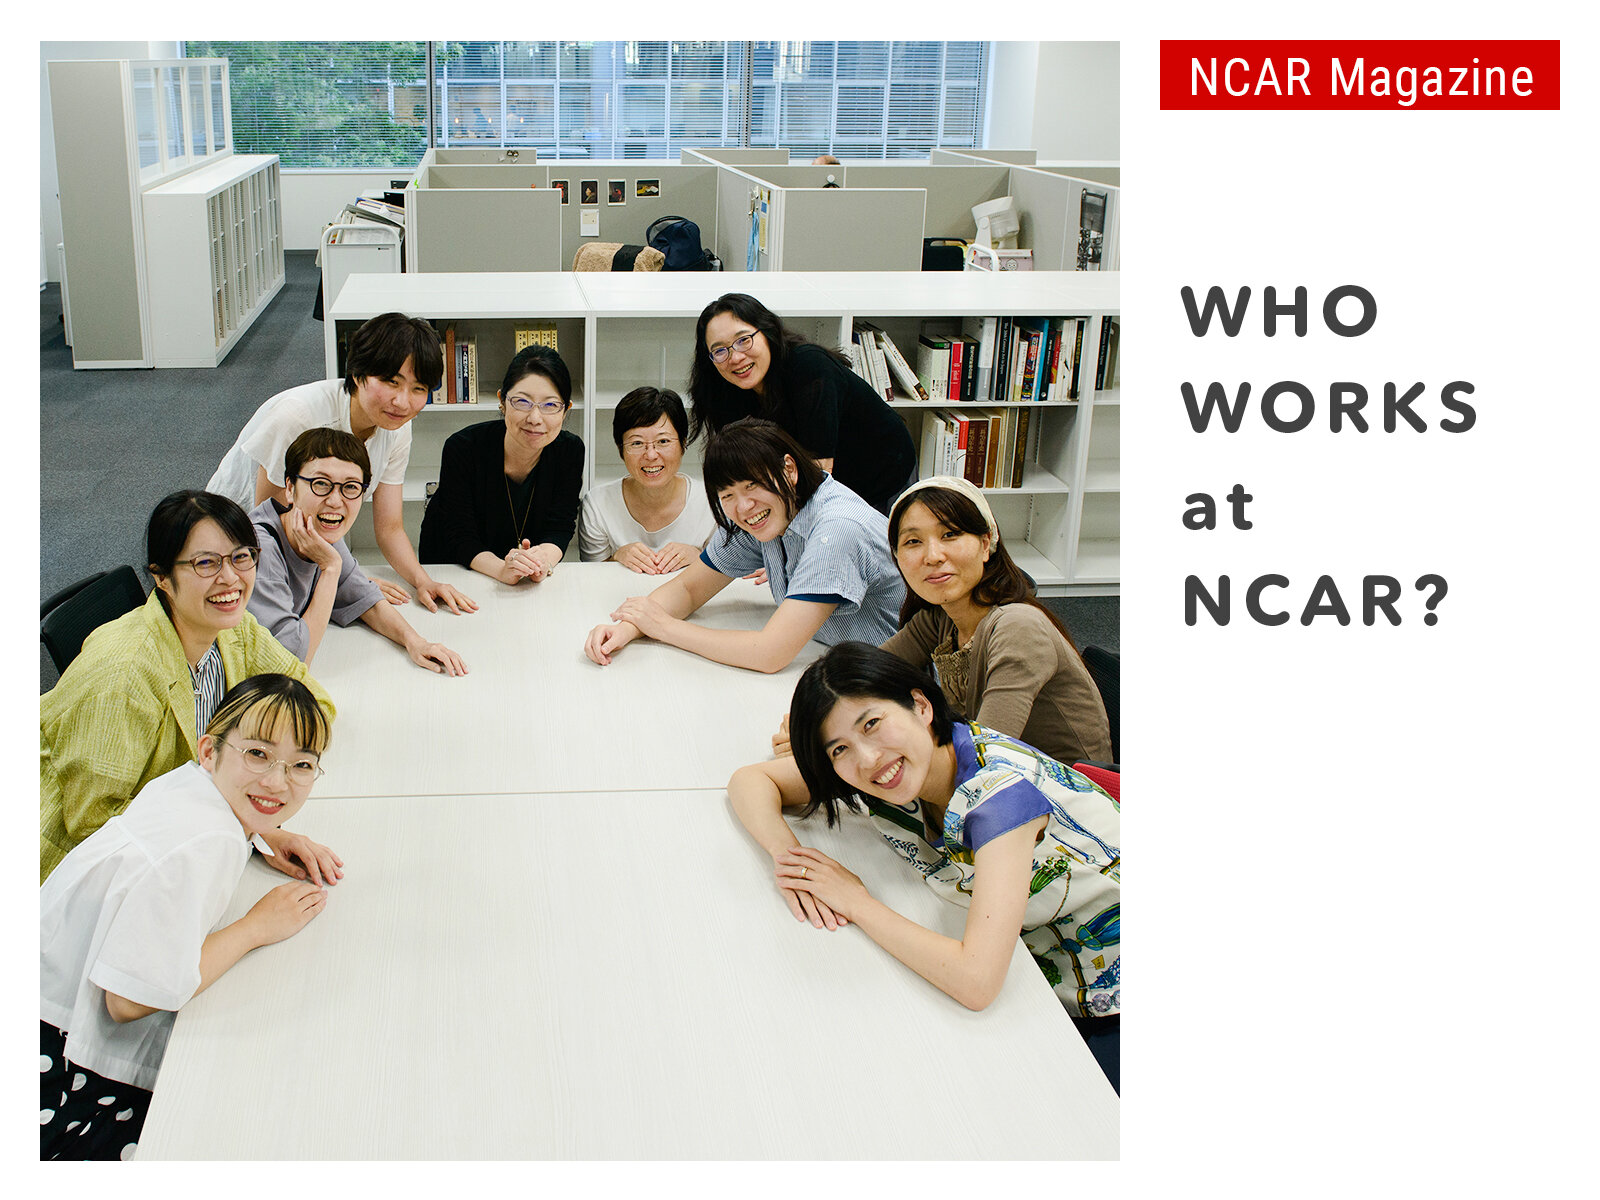 WHO WORKS at NCAR?　Vol.1 Research Resources Group

